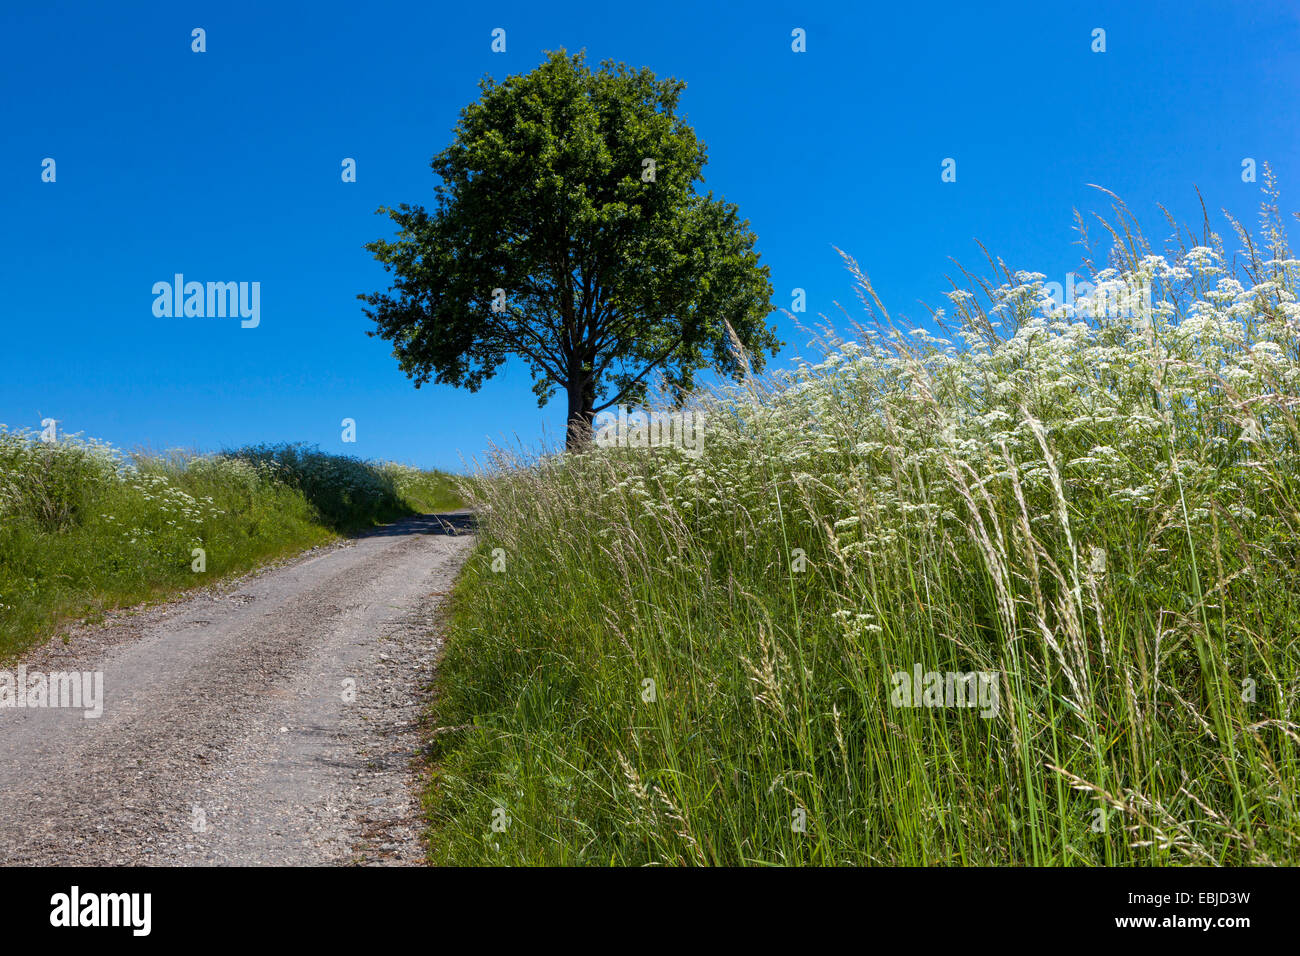 Tree in summer landscape, country road Czech Republic Stock Photo